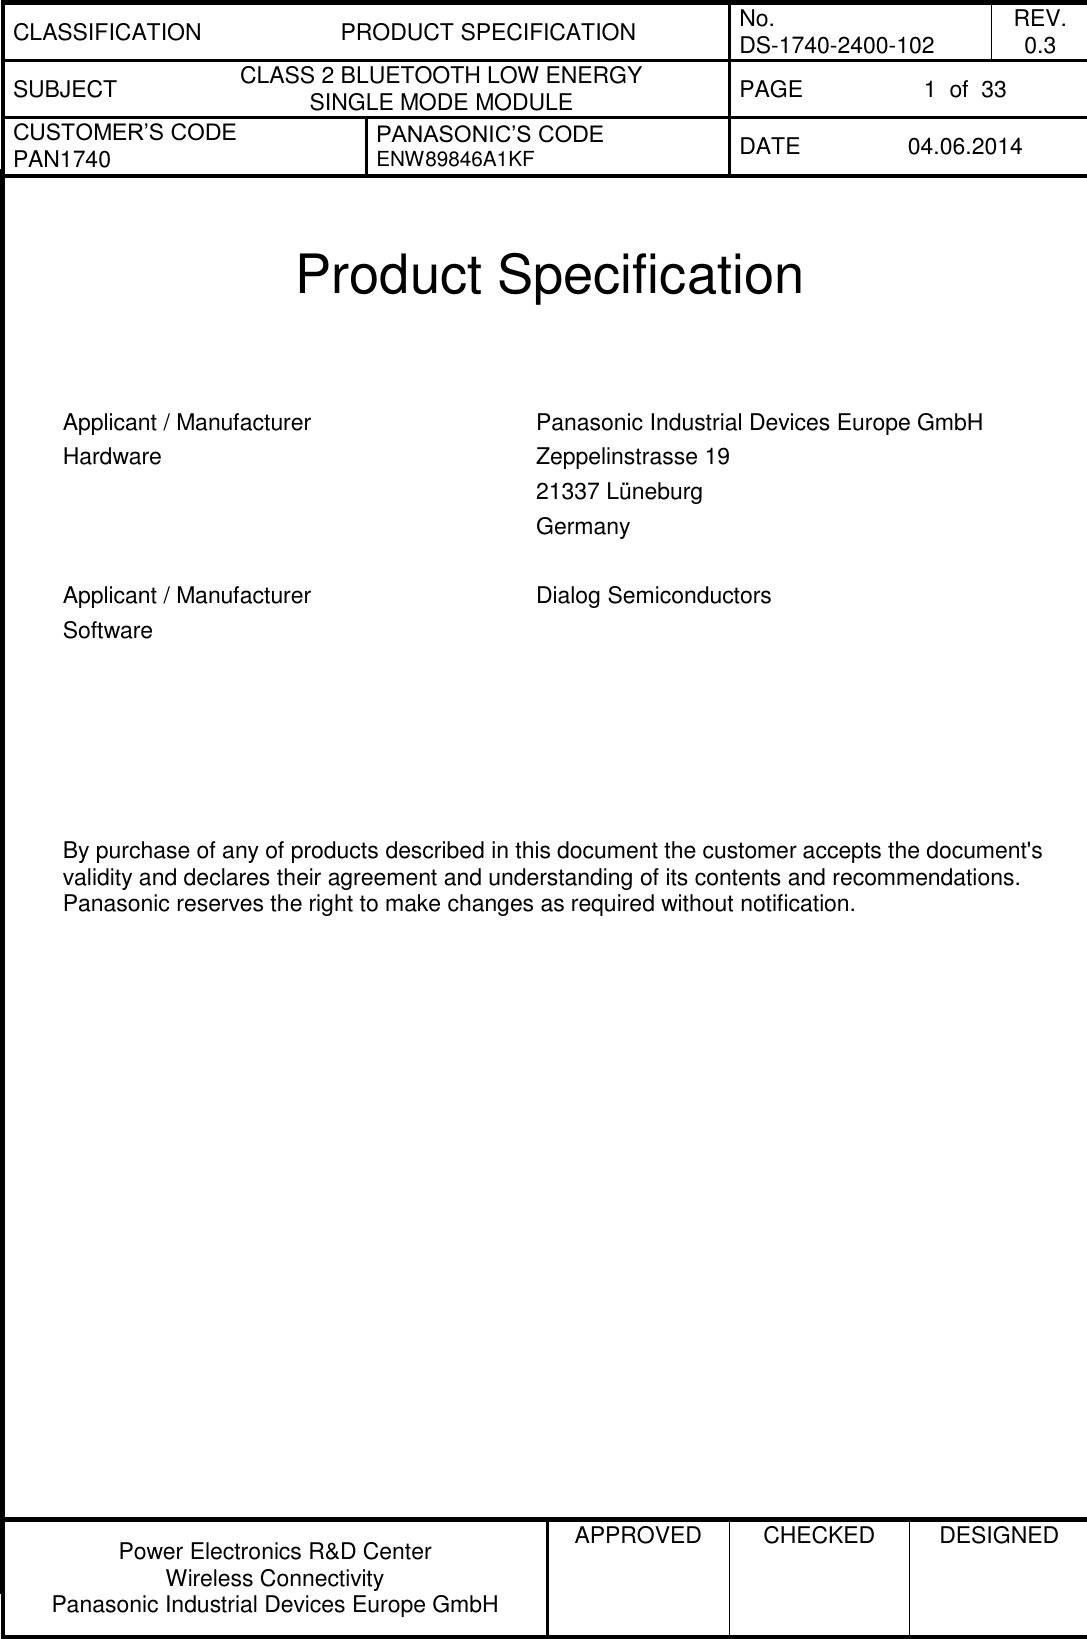 CLASSIFICATION PRODUCT SPECIFICATION No. DS-1740-2400-102 REV. 0.3 SUBJECT CLASS 2 BLUETOOTH LOW ENERGY  SINGLE MODE MODULE PAGE 1  of  33 CUSTOMER’S CODE PAN1740 PANASONIC’S CODE ENW89846A1KF DATE 04.06.2014   Power Electronics R&amp;D Center Wireless Connectivity Panasonic Industrial Devices Europe GmbH APPROVED  CHECKED  DESIGNED    Product Specification   Applicant / Manufacturer Hardware Panasonic Industrial Devices Europe GmbH Zeppelinstrasse 19 21337 Lüneburg Germany   Applicant / Manufacturer Software Dialog Semiconductors         By purchase of any of products described in this document the customer accepts the document&apos;s validity and declares their agreement and understanding of its contents and recommendations. Panasonic reserves the right to make changes as required without notification.       